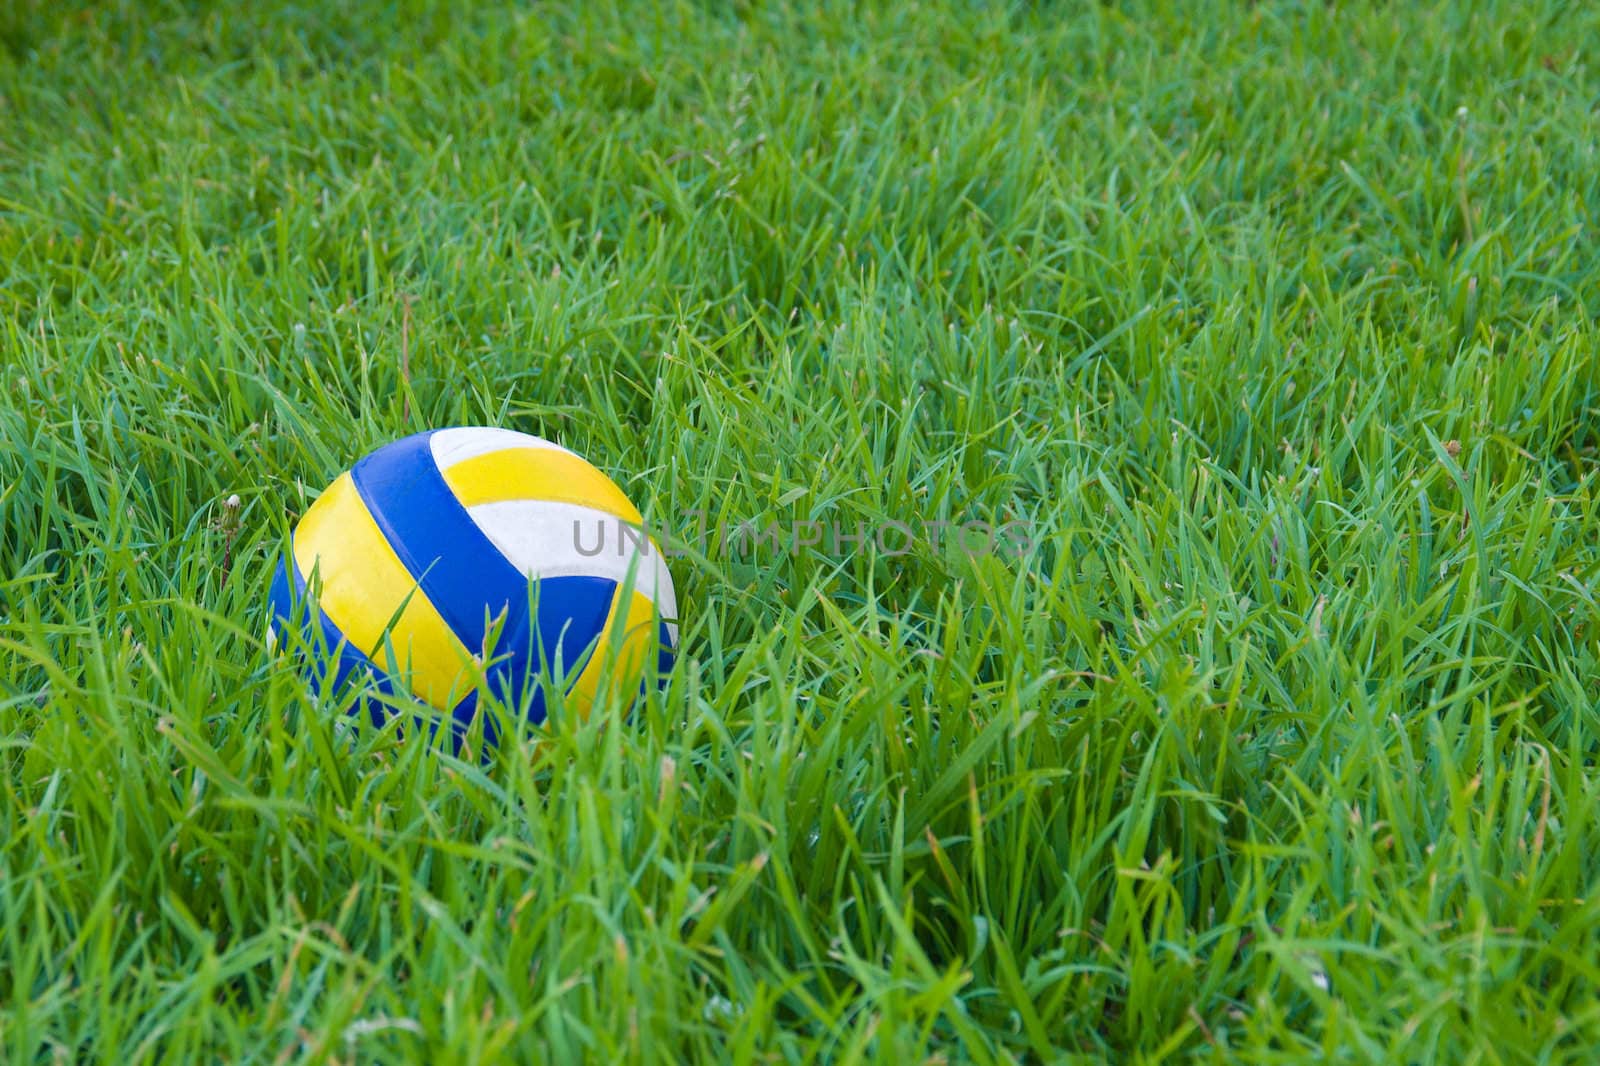 Multi-colour ball laying on green grass